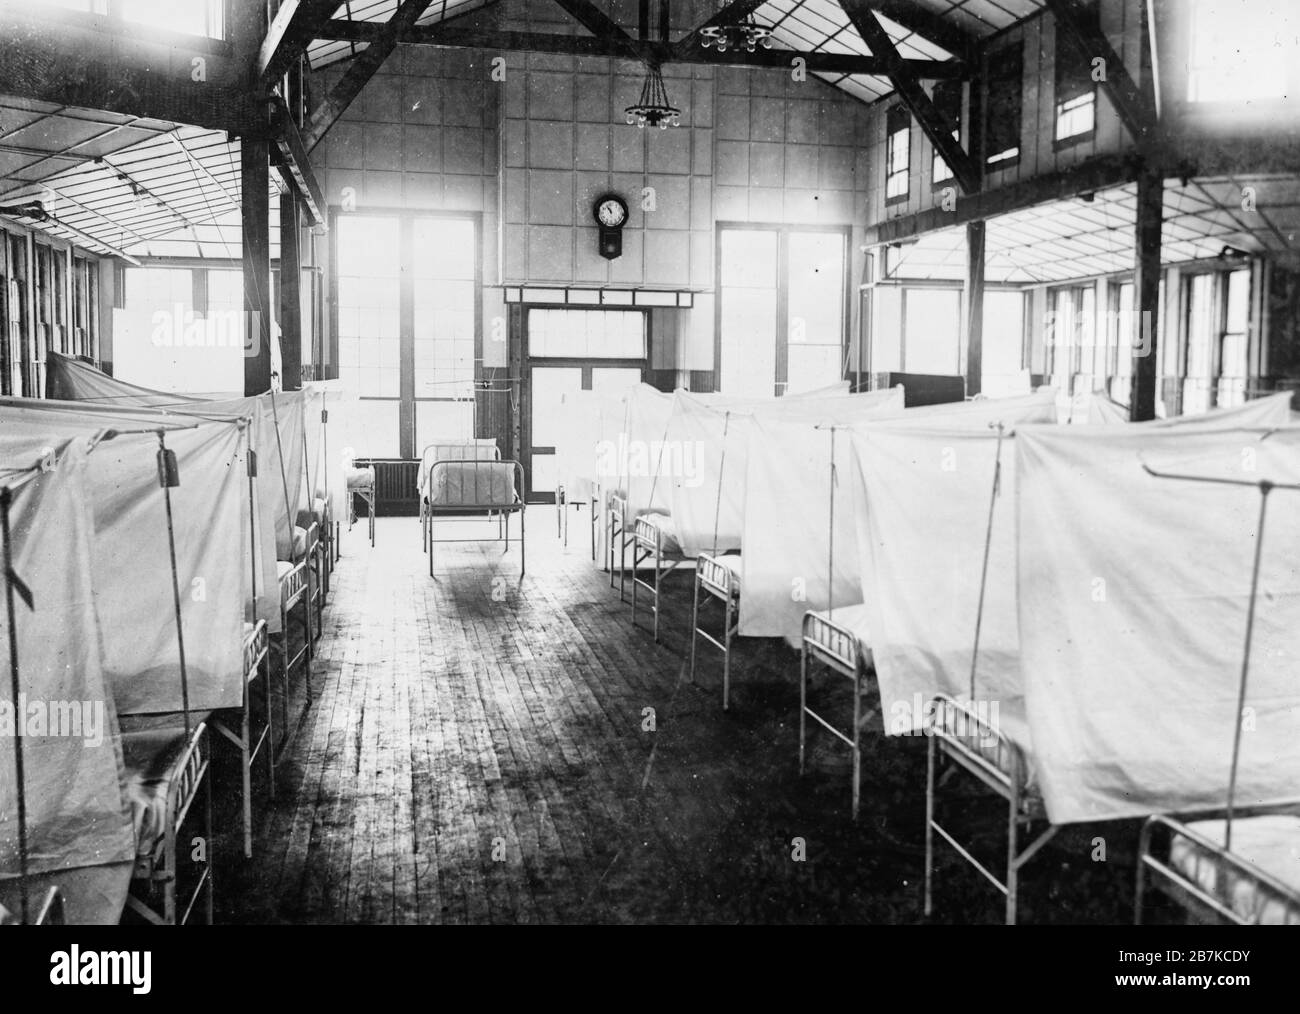 Interior of Red Cross House at U.S. General Hospital #16, New Haven, Conn. during the influenza epidemic. The beds are isolated by curtains, circa 1918 Stock Photo